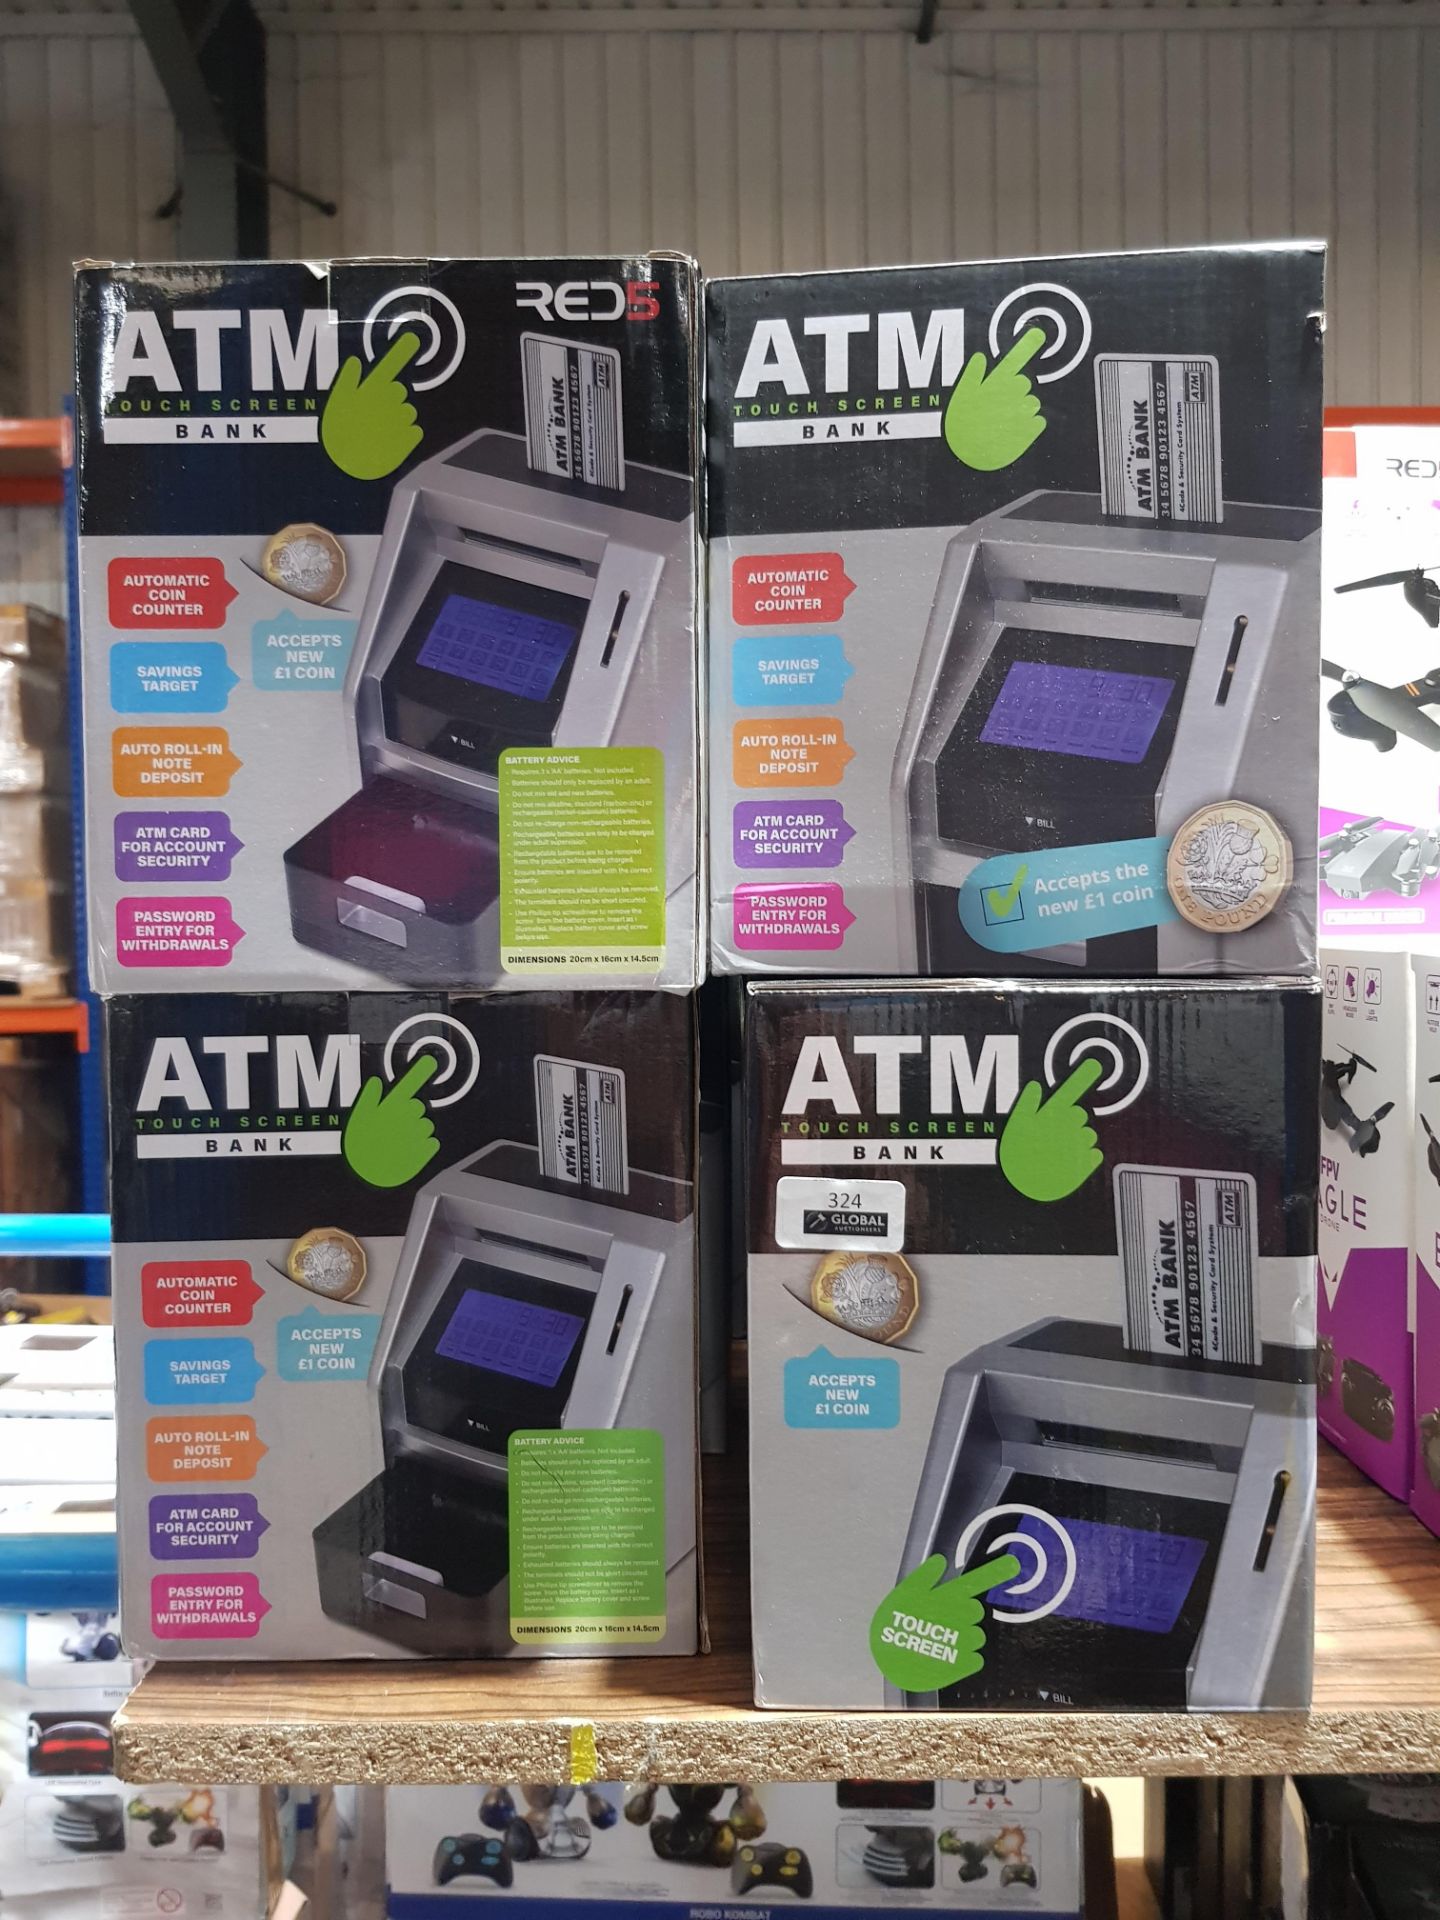 6 X RED5 ATM TOUCH SCREEN BANK